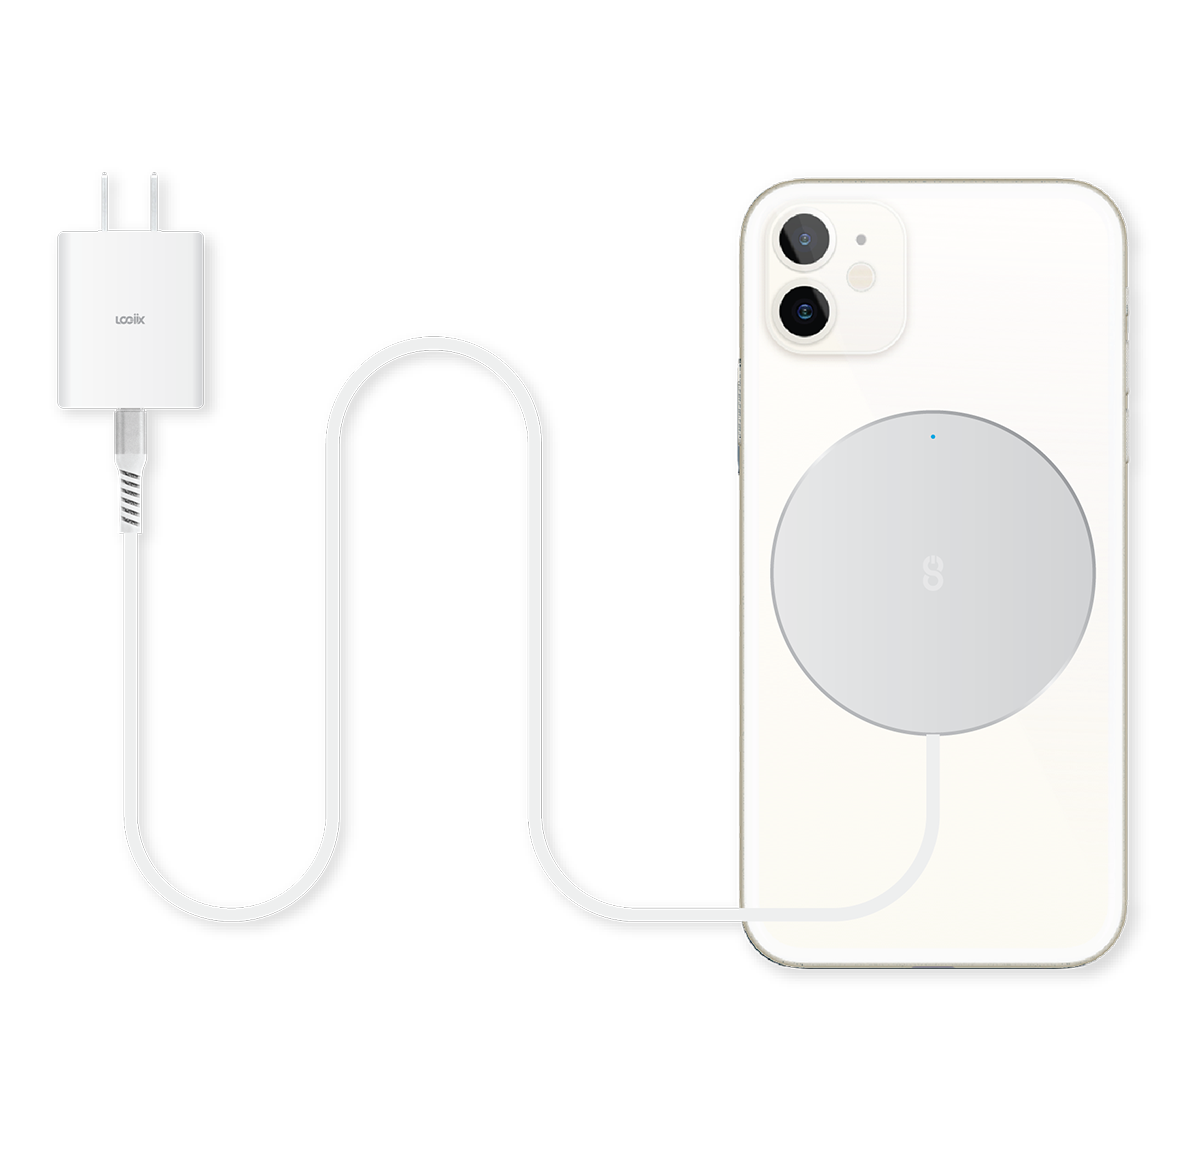 Silver MagSafe compatible fast-charging magnetic charger with built-in 1.5m USB-C cable charging a white iPhone 12 